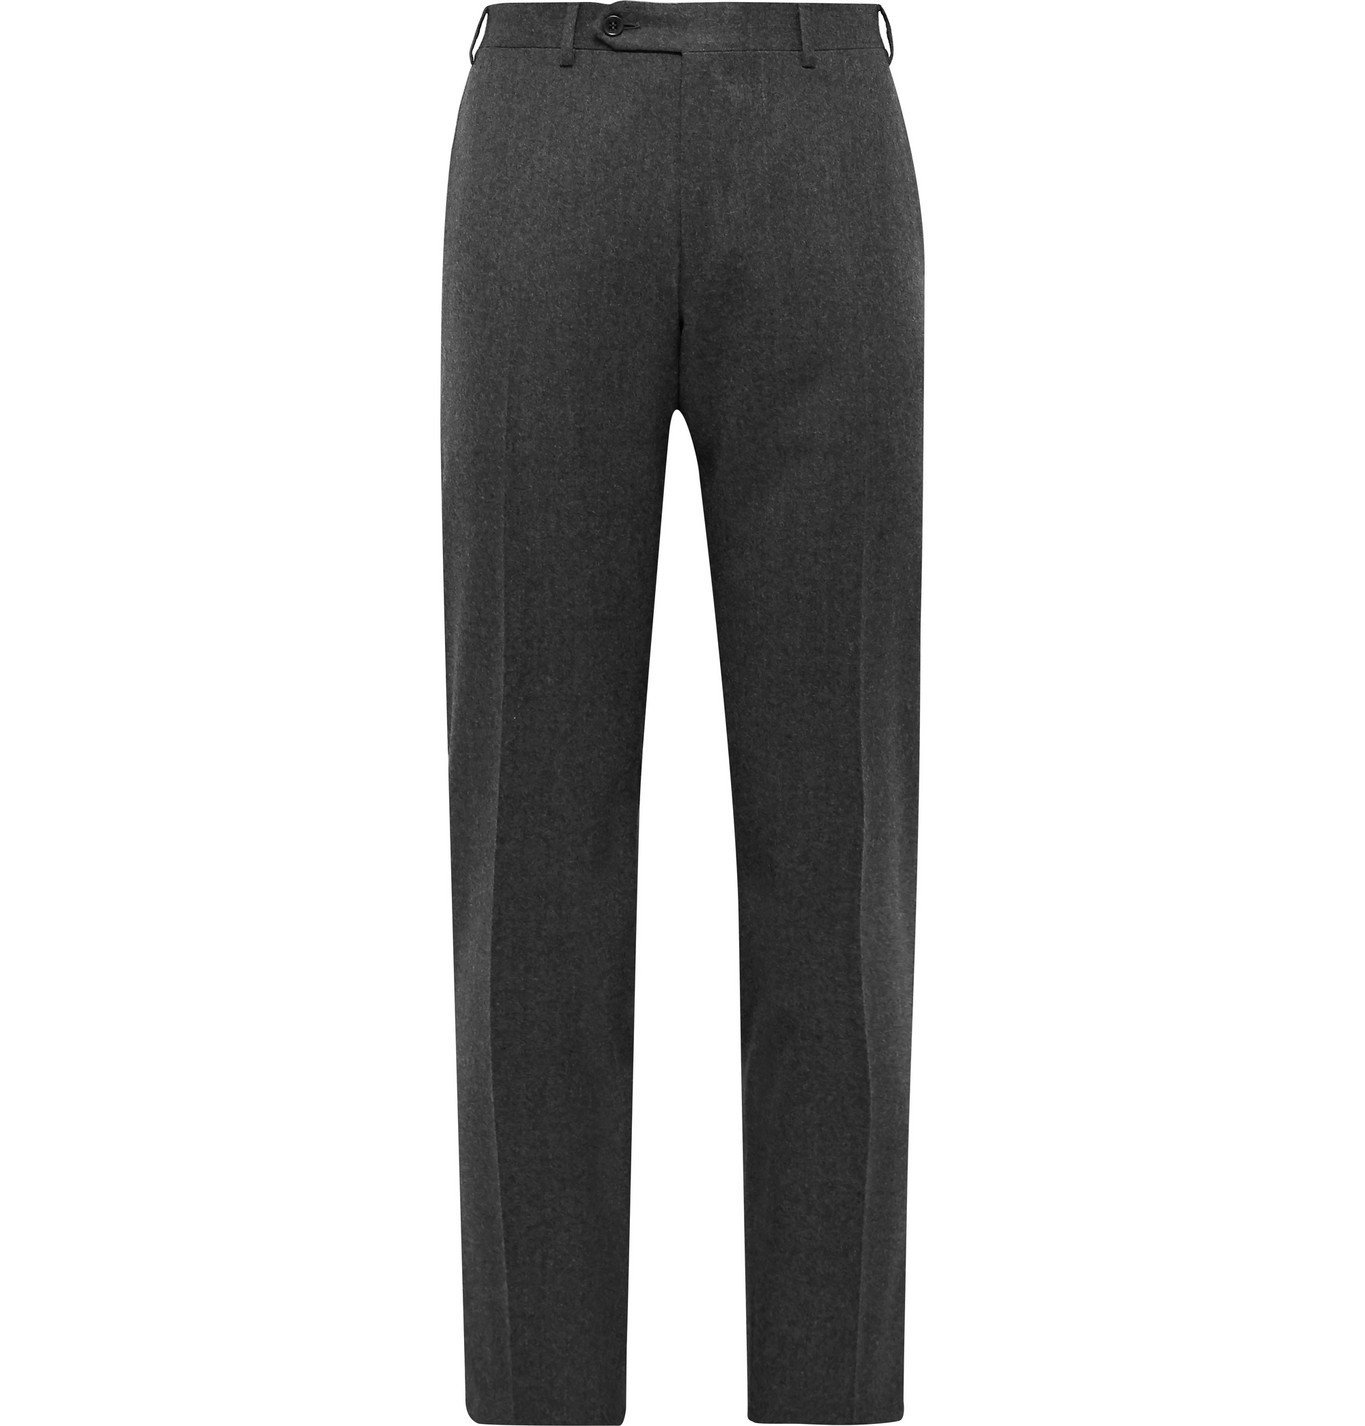 Canali - Super 120s Wool-Flannel Trousers - Gray Canali